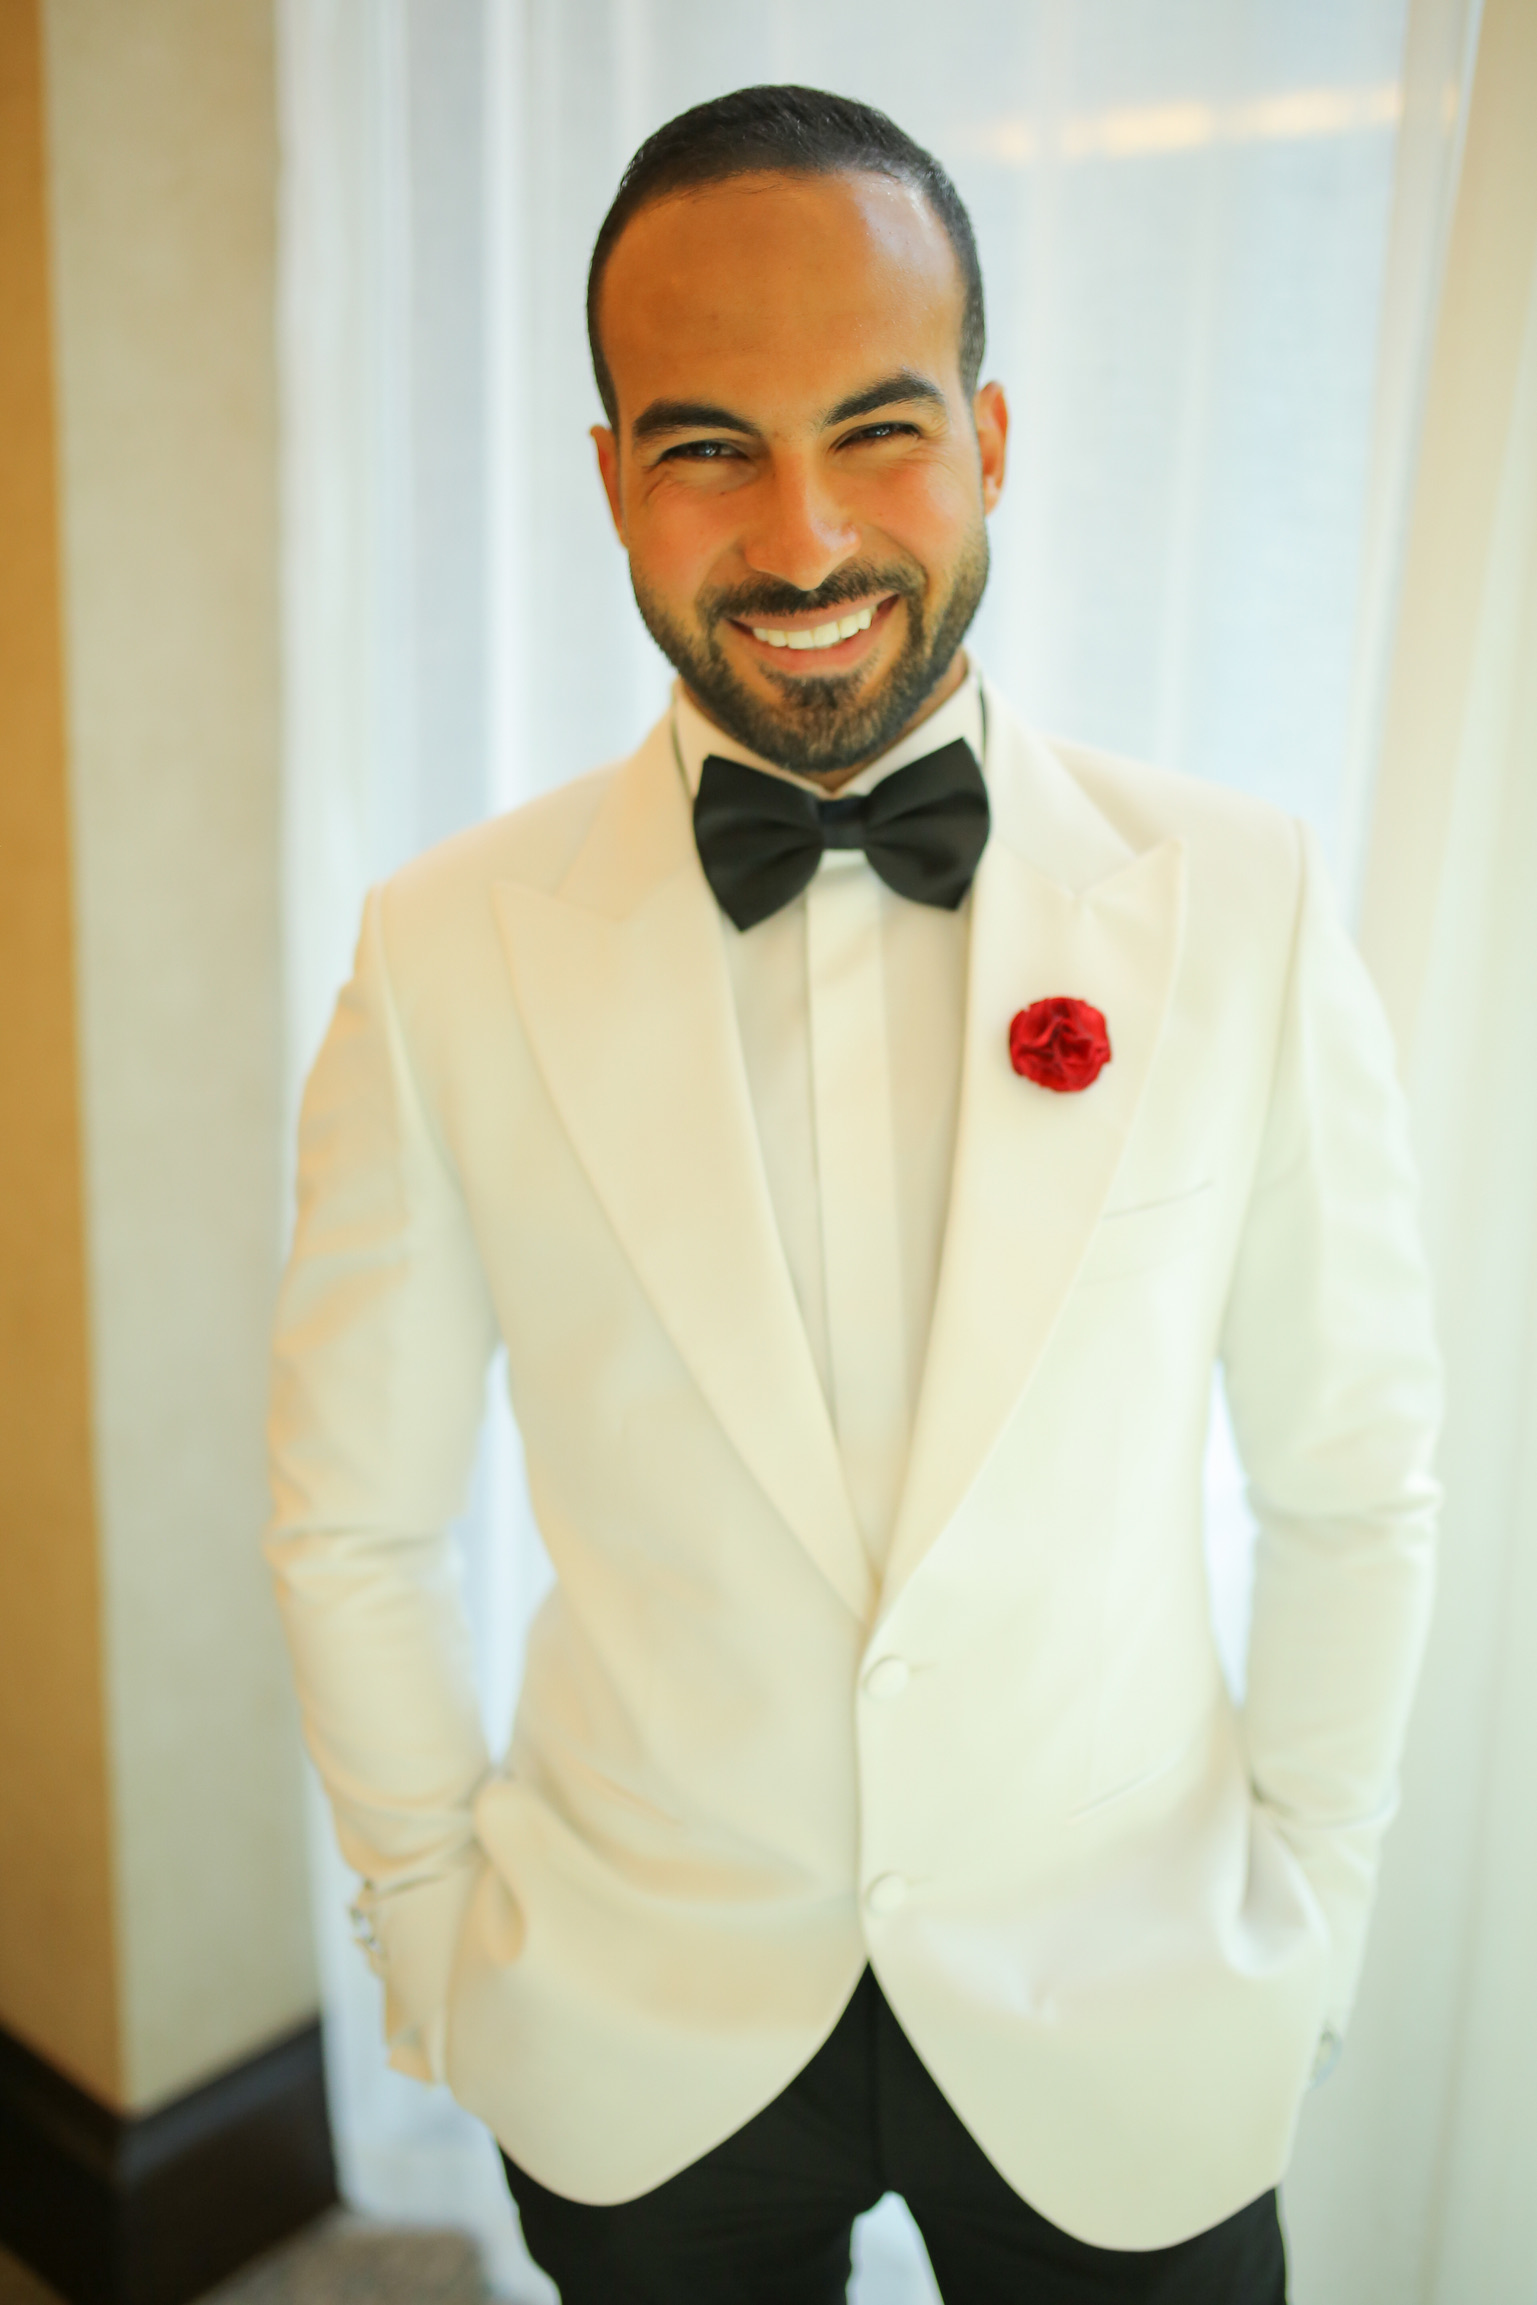 Egyptian Business Man and Motivational Speaker Aly Osman to Interview ...